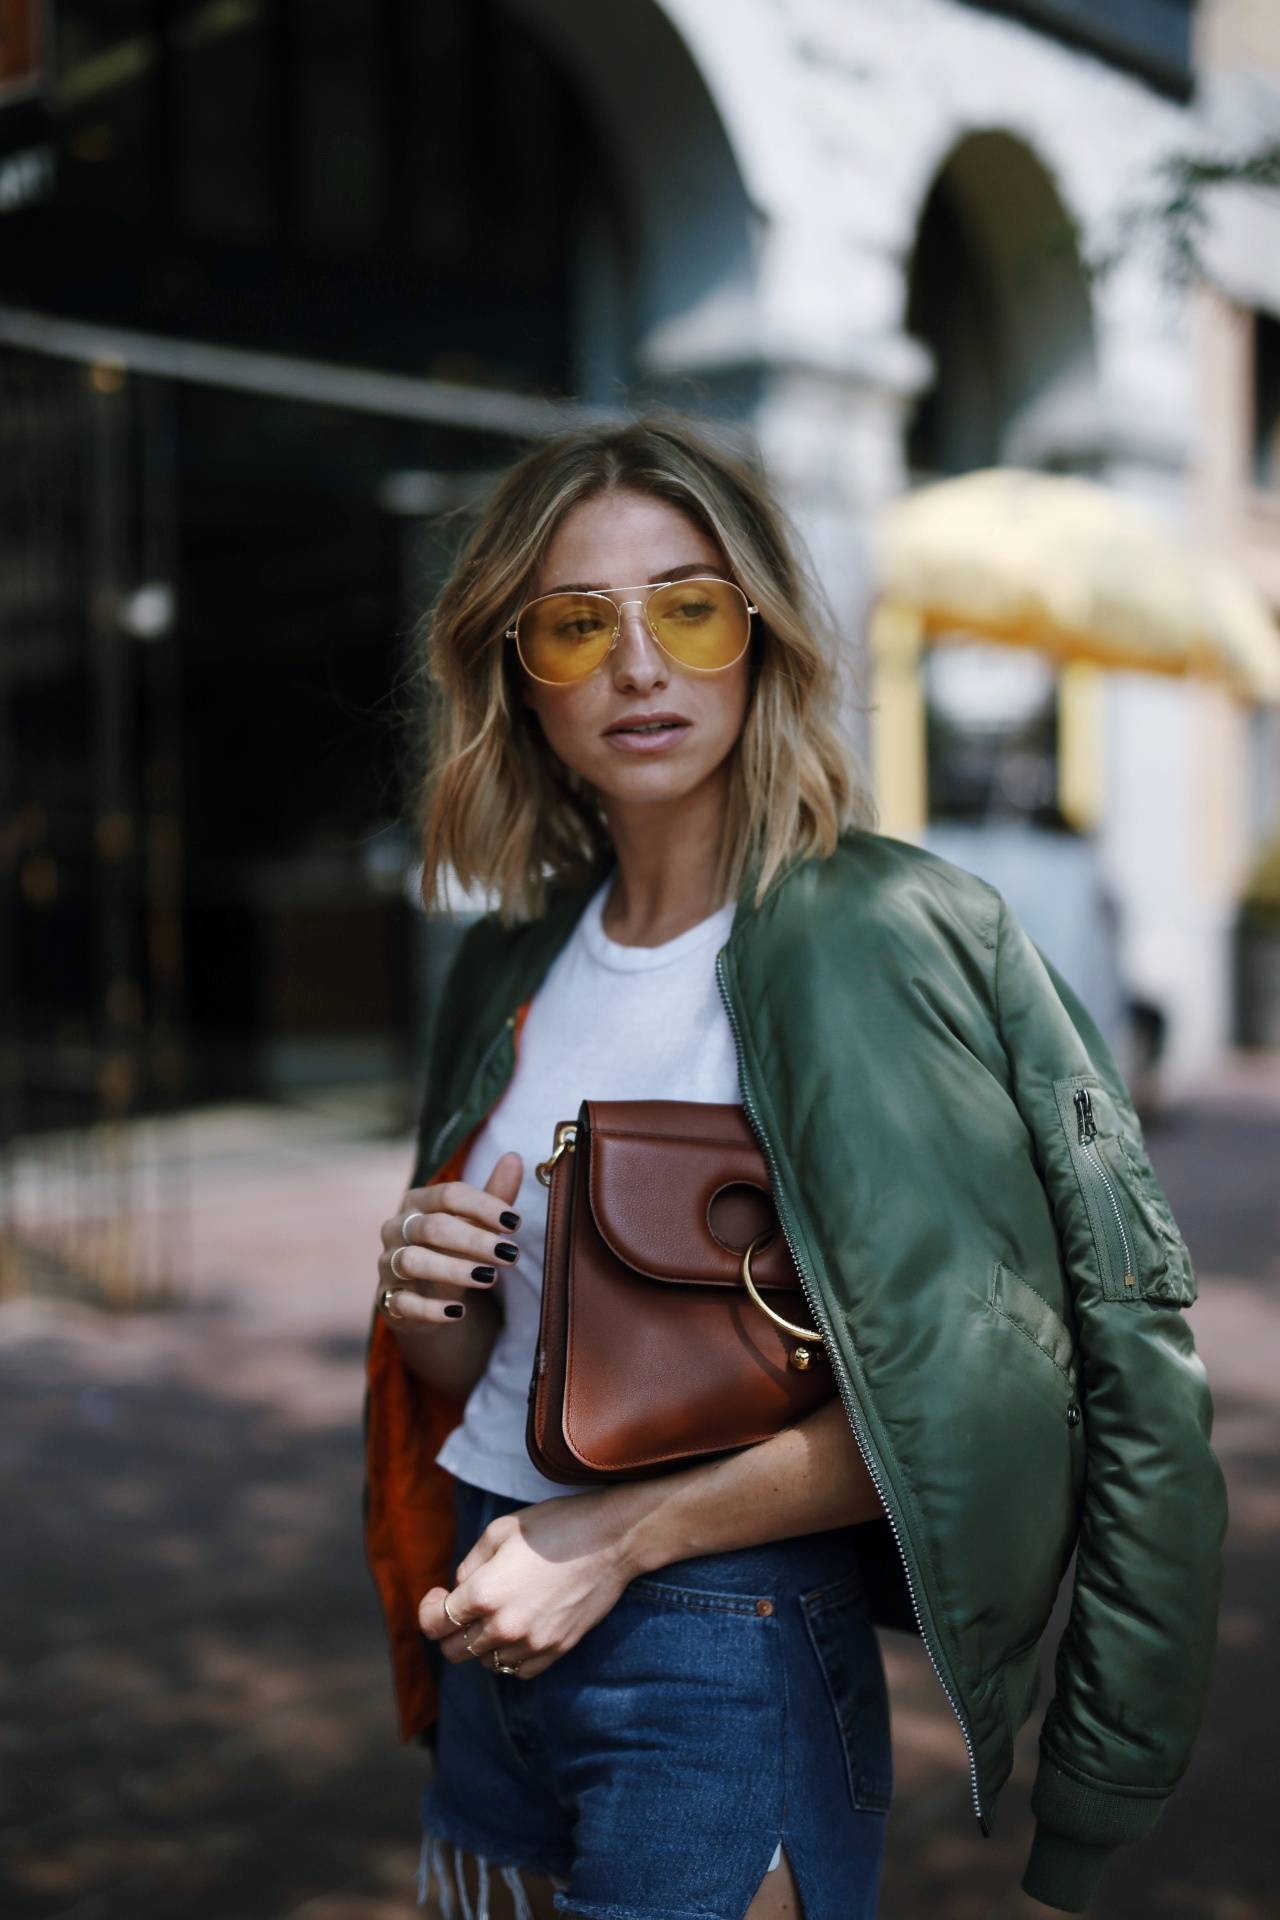 Style and beauty blogger Jill Lansky of The August Diaries on how to mix comfort and style in Alpha Industries bomber jacket, yellow sunglasses, long bob, beachy waves